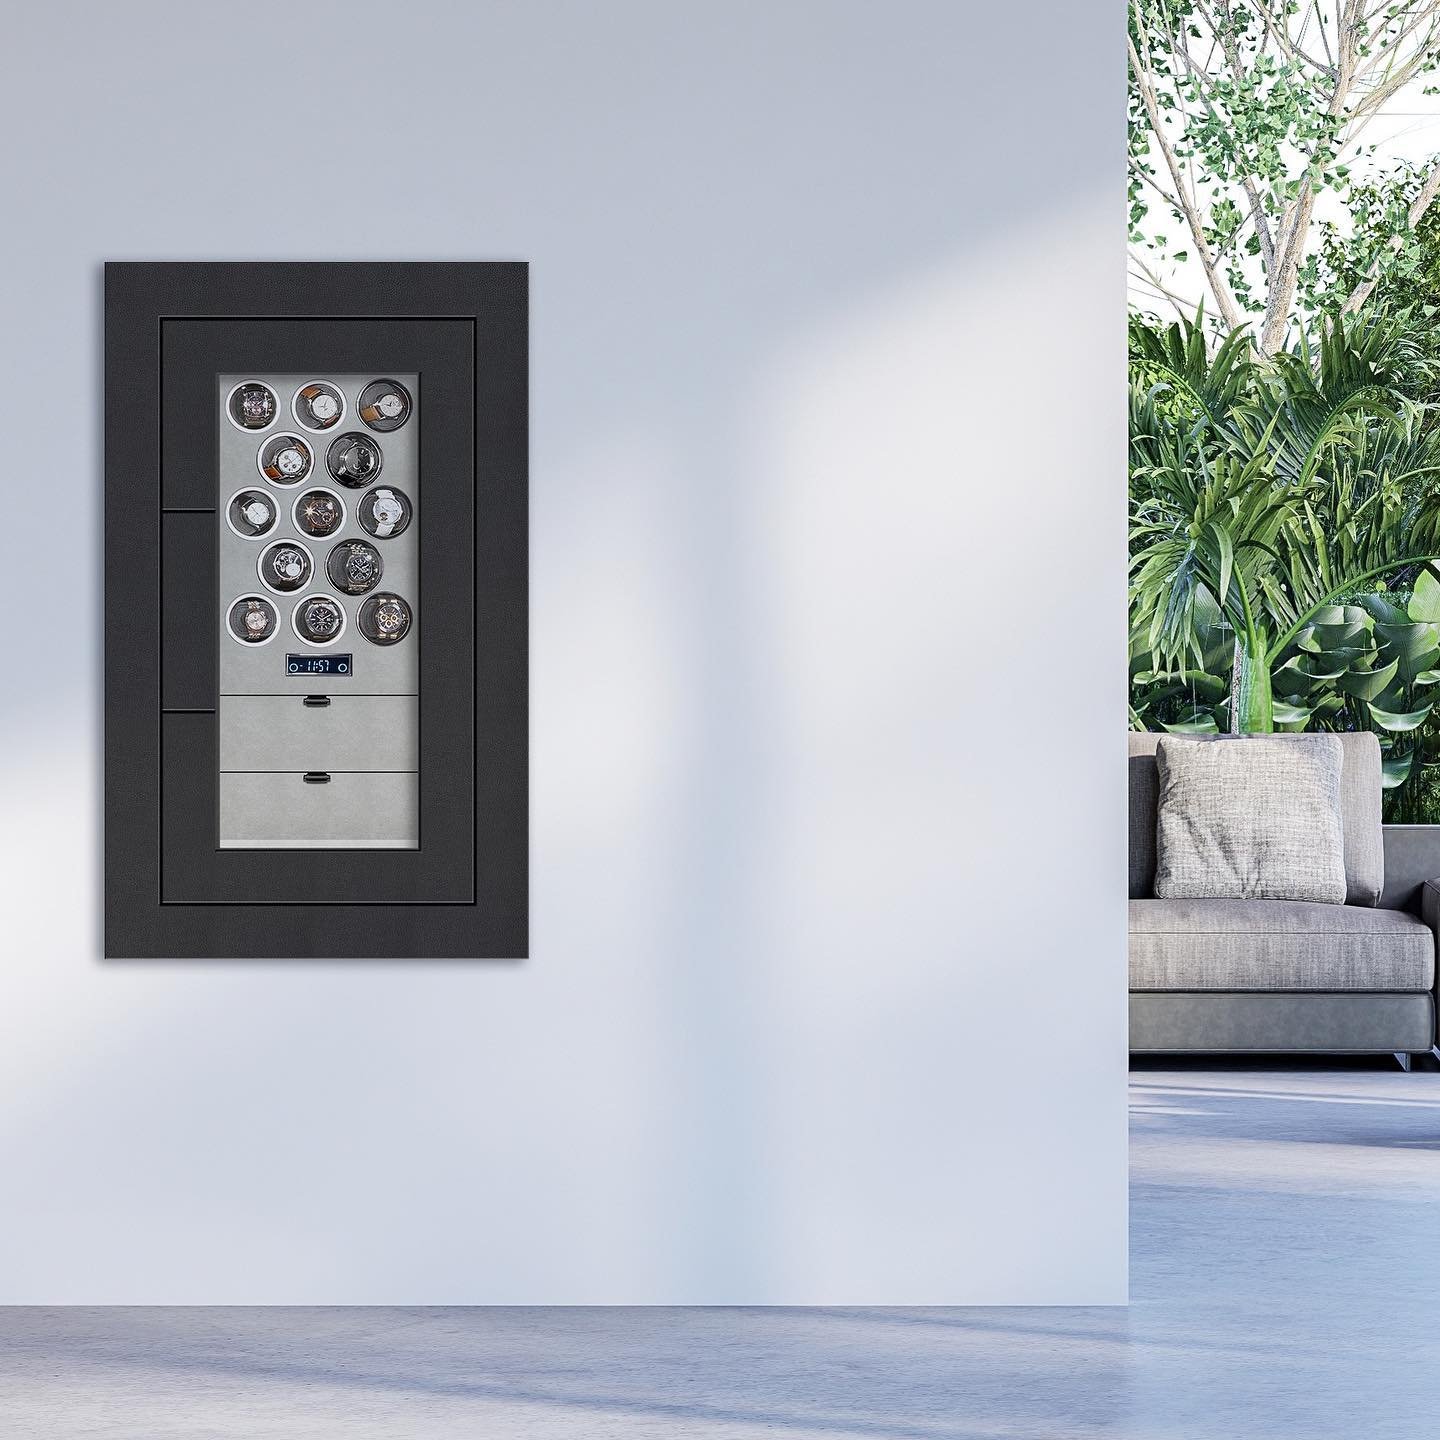 We proudly welcome the WallMaster to our collection of prestigious luxury safes: a dedicated depth-minimized luxury safe...